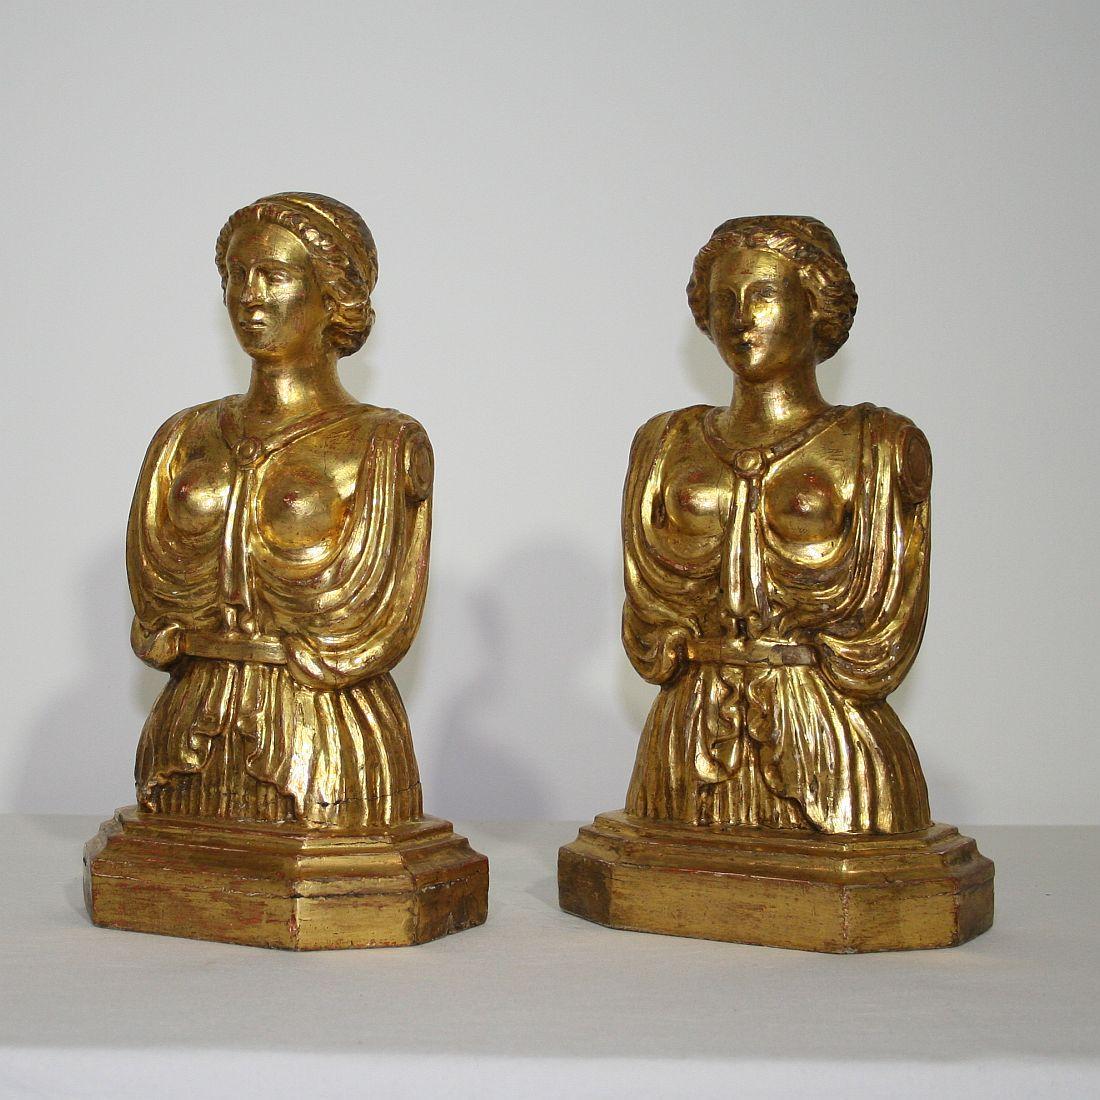 Neoclassical Pair of Italian 18th Century Giltwood Classical Busts